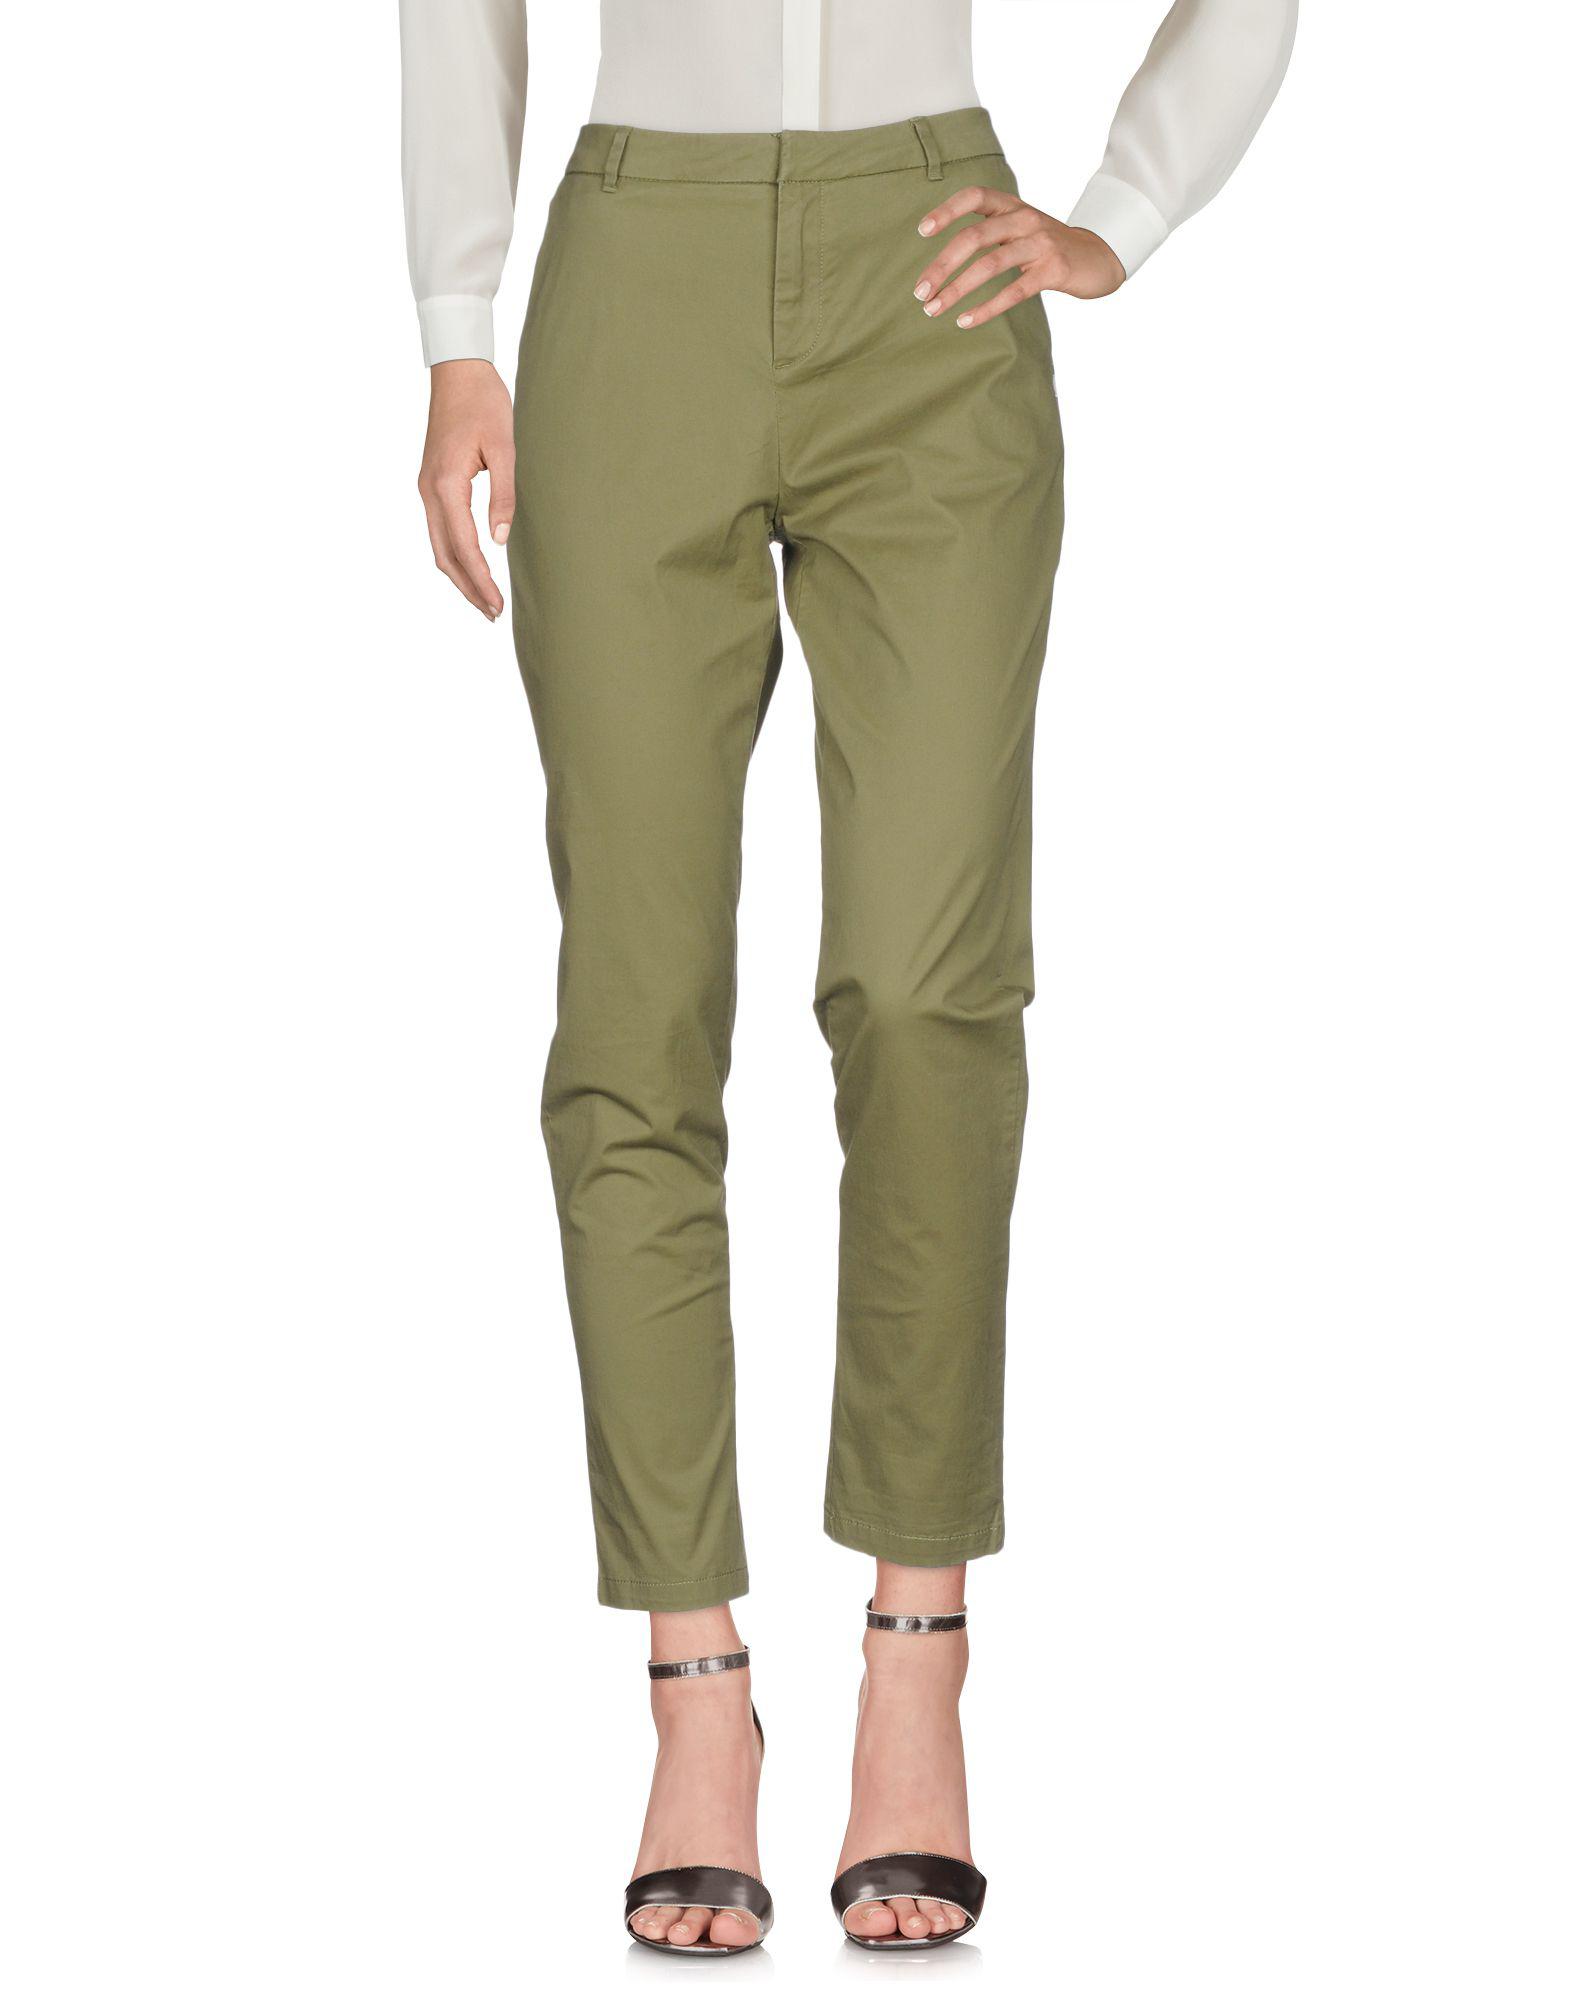 Maison Scotch Cotton Casual Pants in Military Green (Green) - Lyst